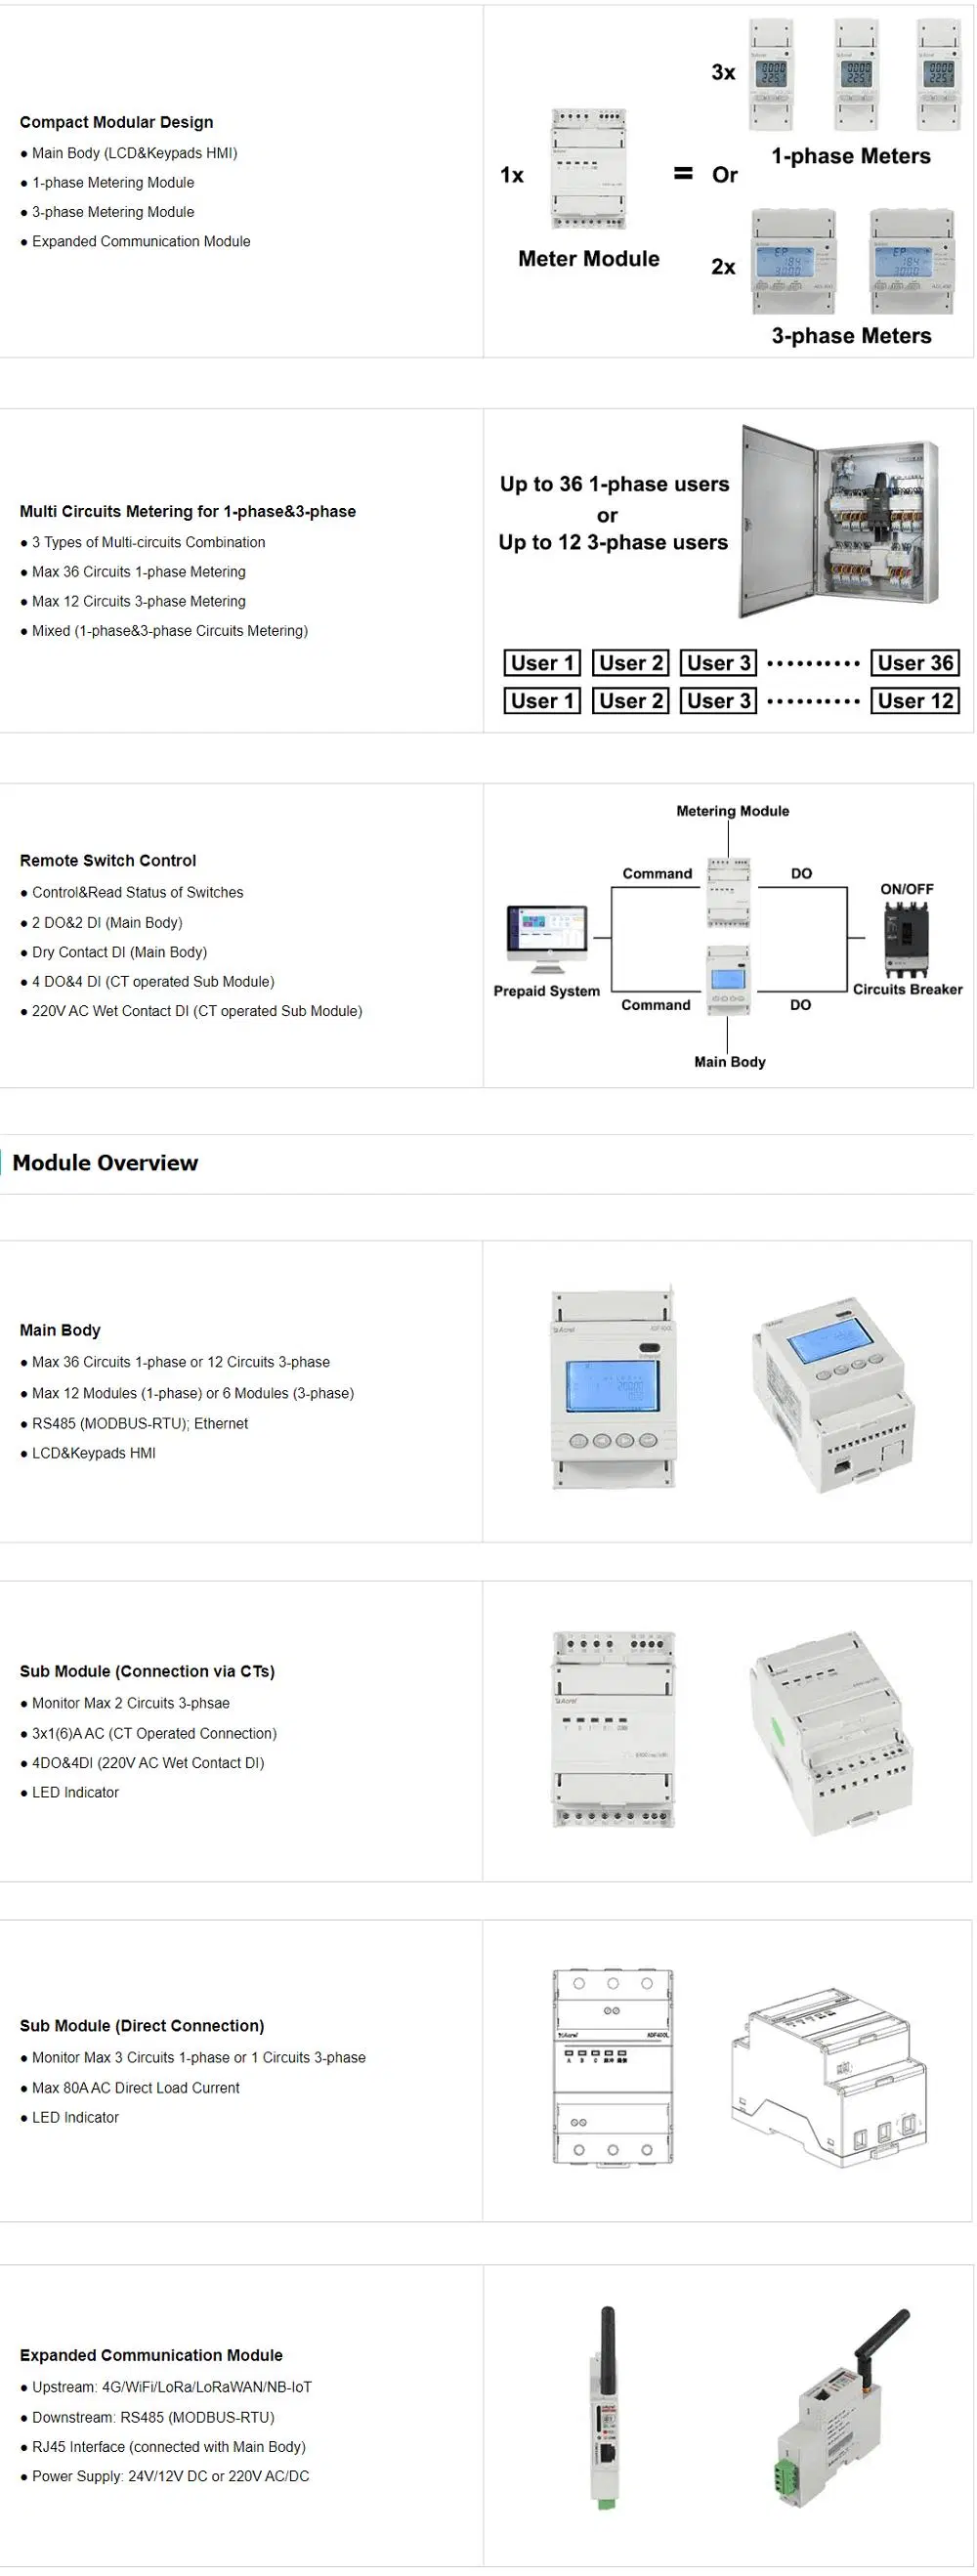 Iot-Based Electricity Power Meter with Multi-Channel for Energy Monitoring System